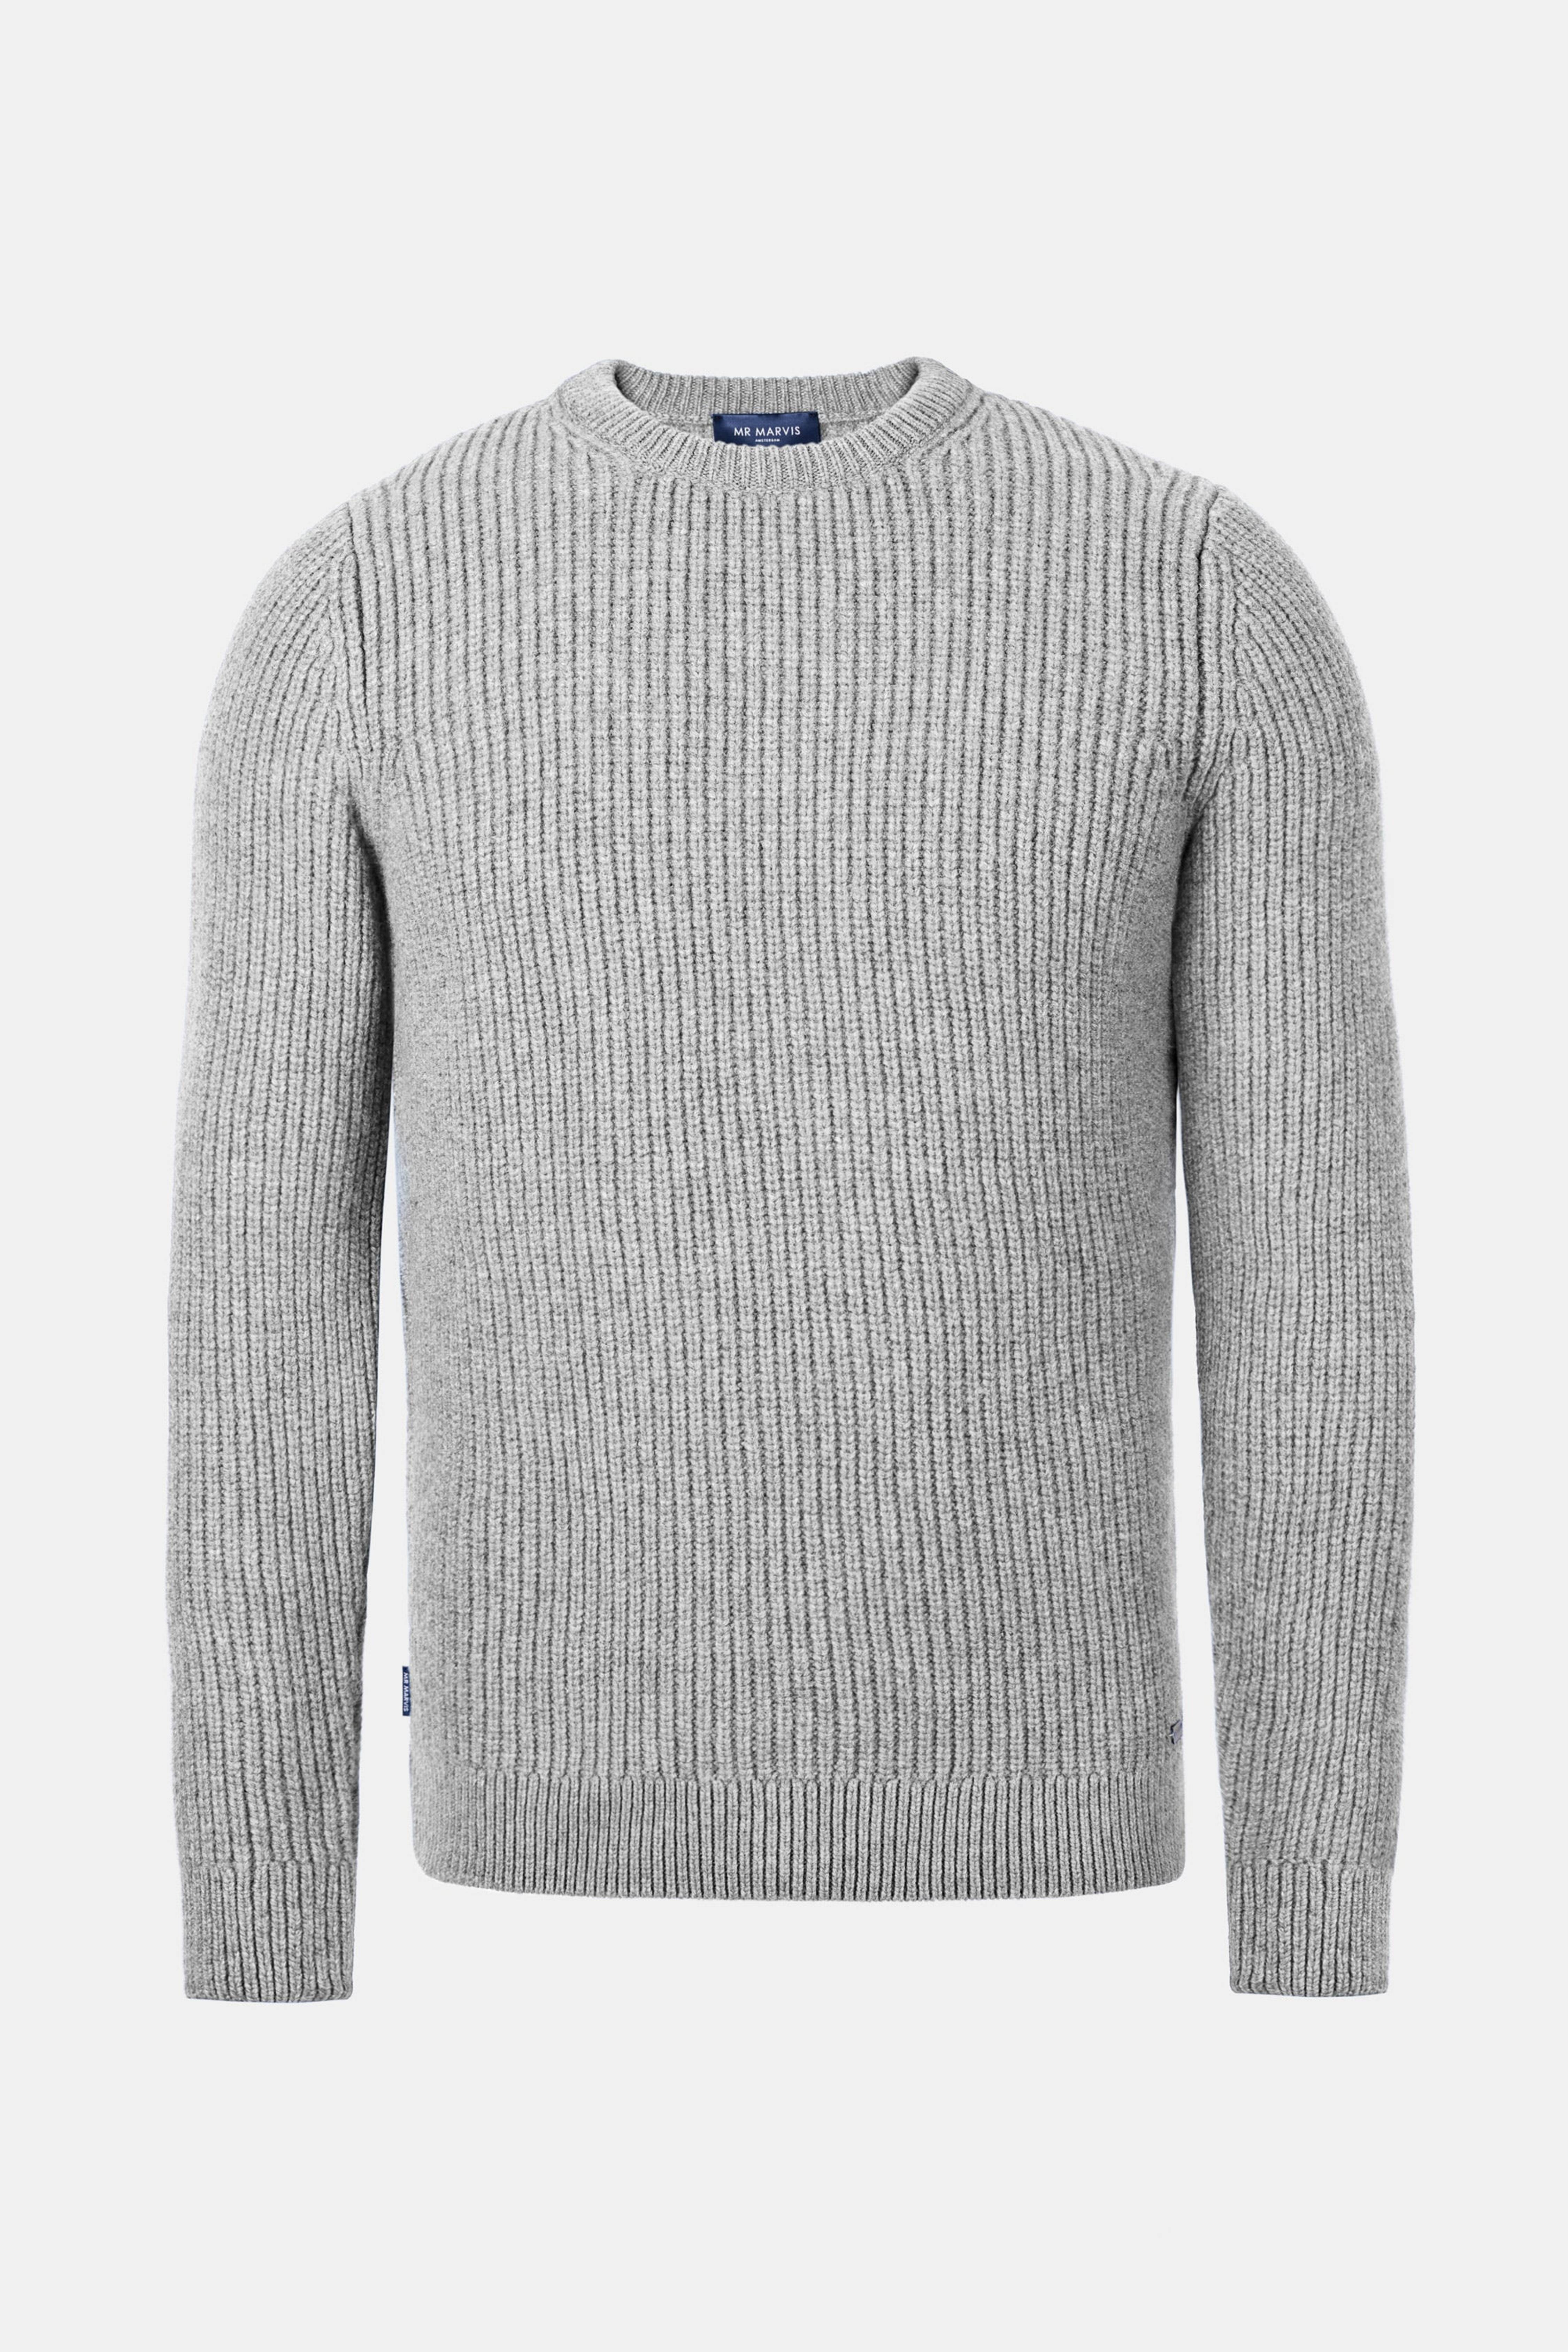 Oysters - Die Knit Pullovers